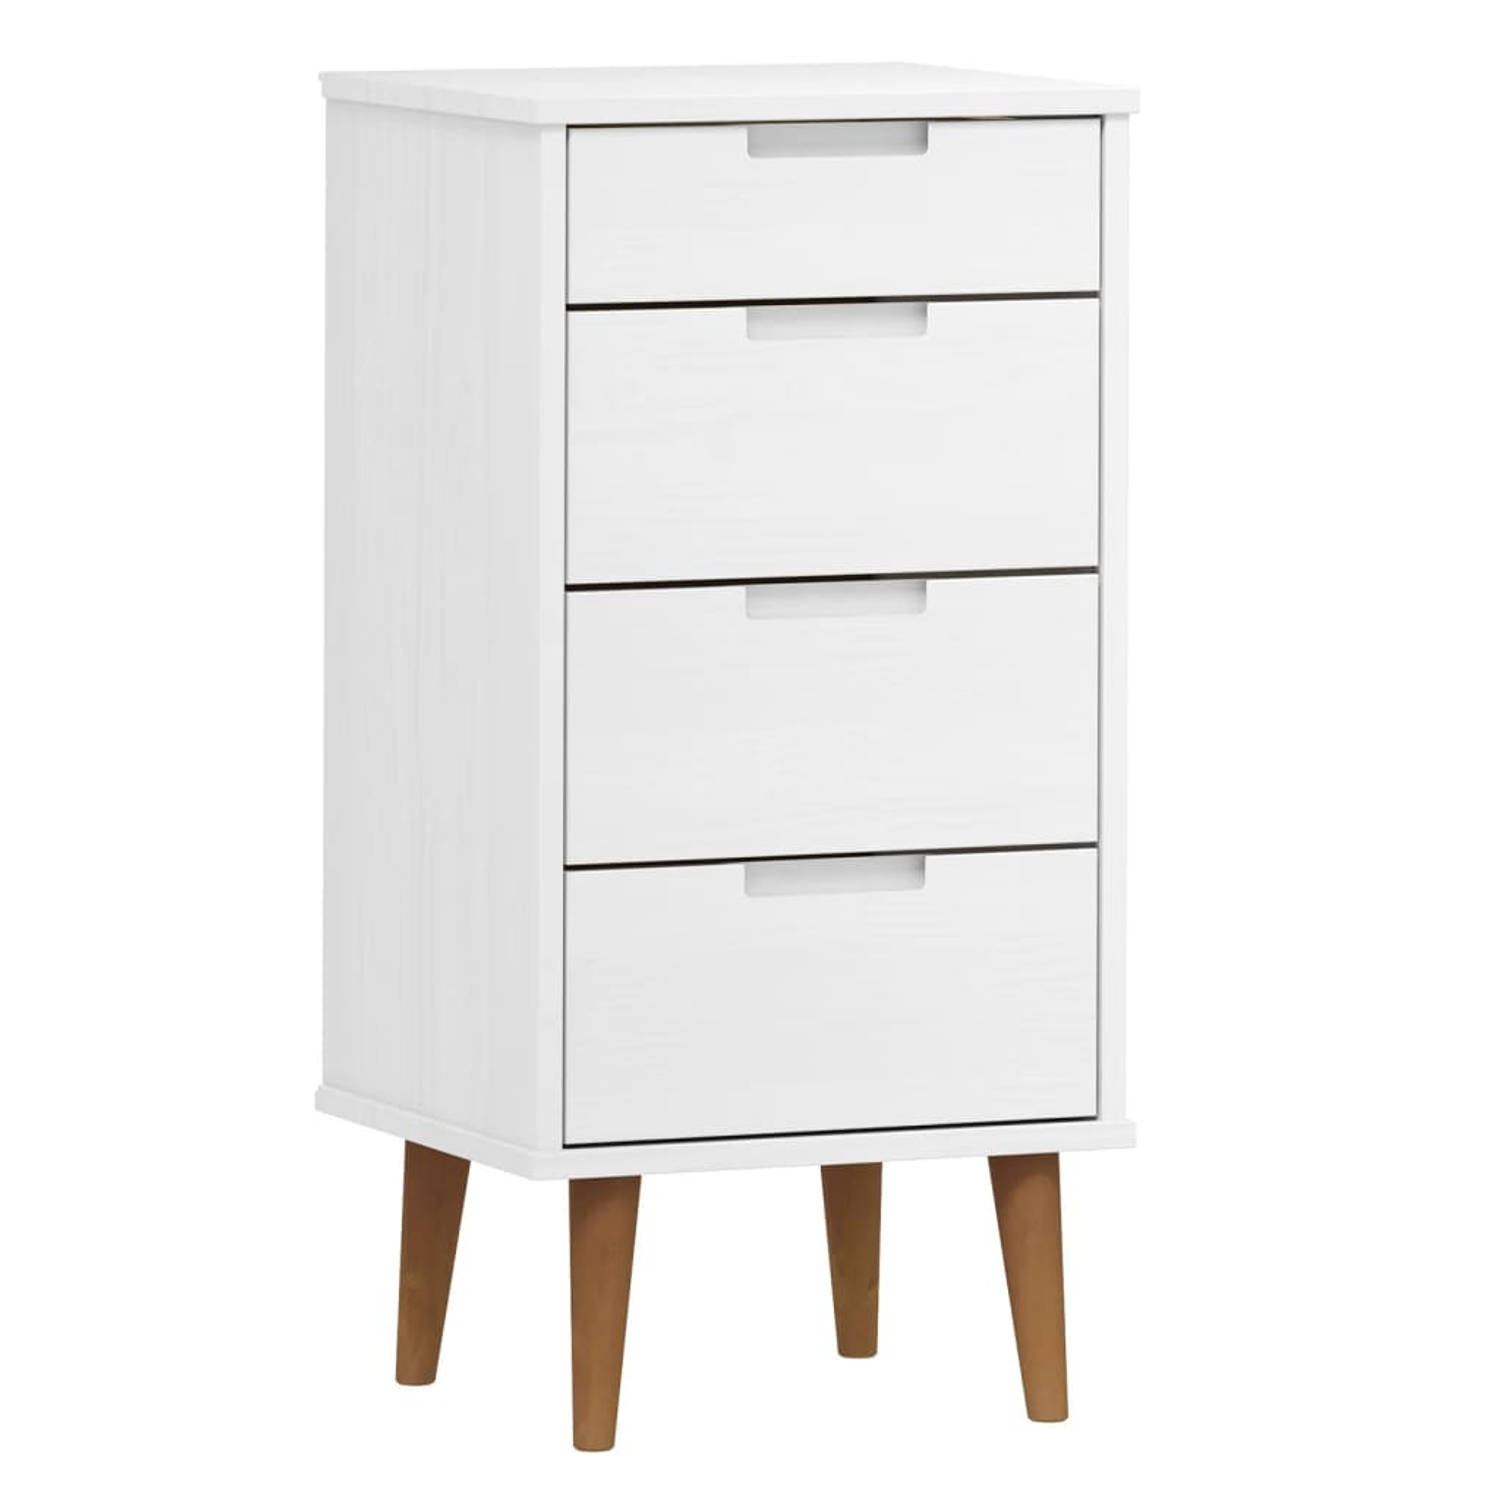 The Living Store Ladekast MOLDE 40x35x82 cm massief grenenhout wit - Commode